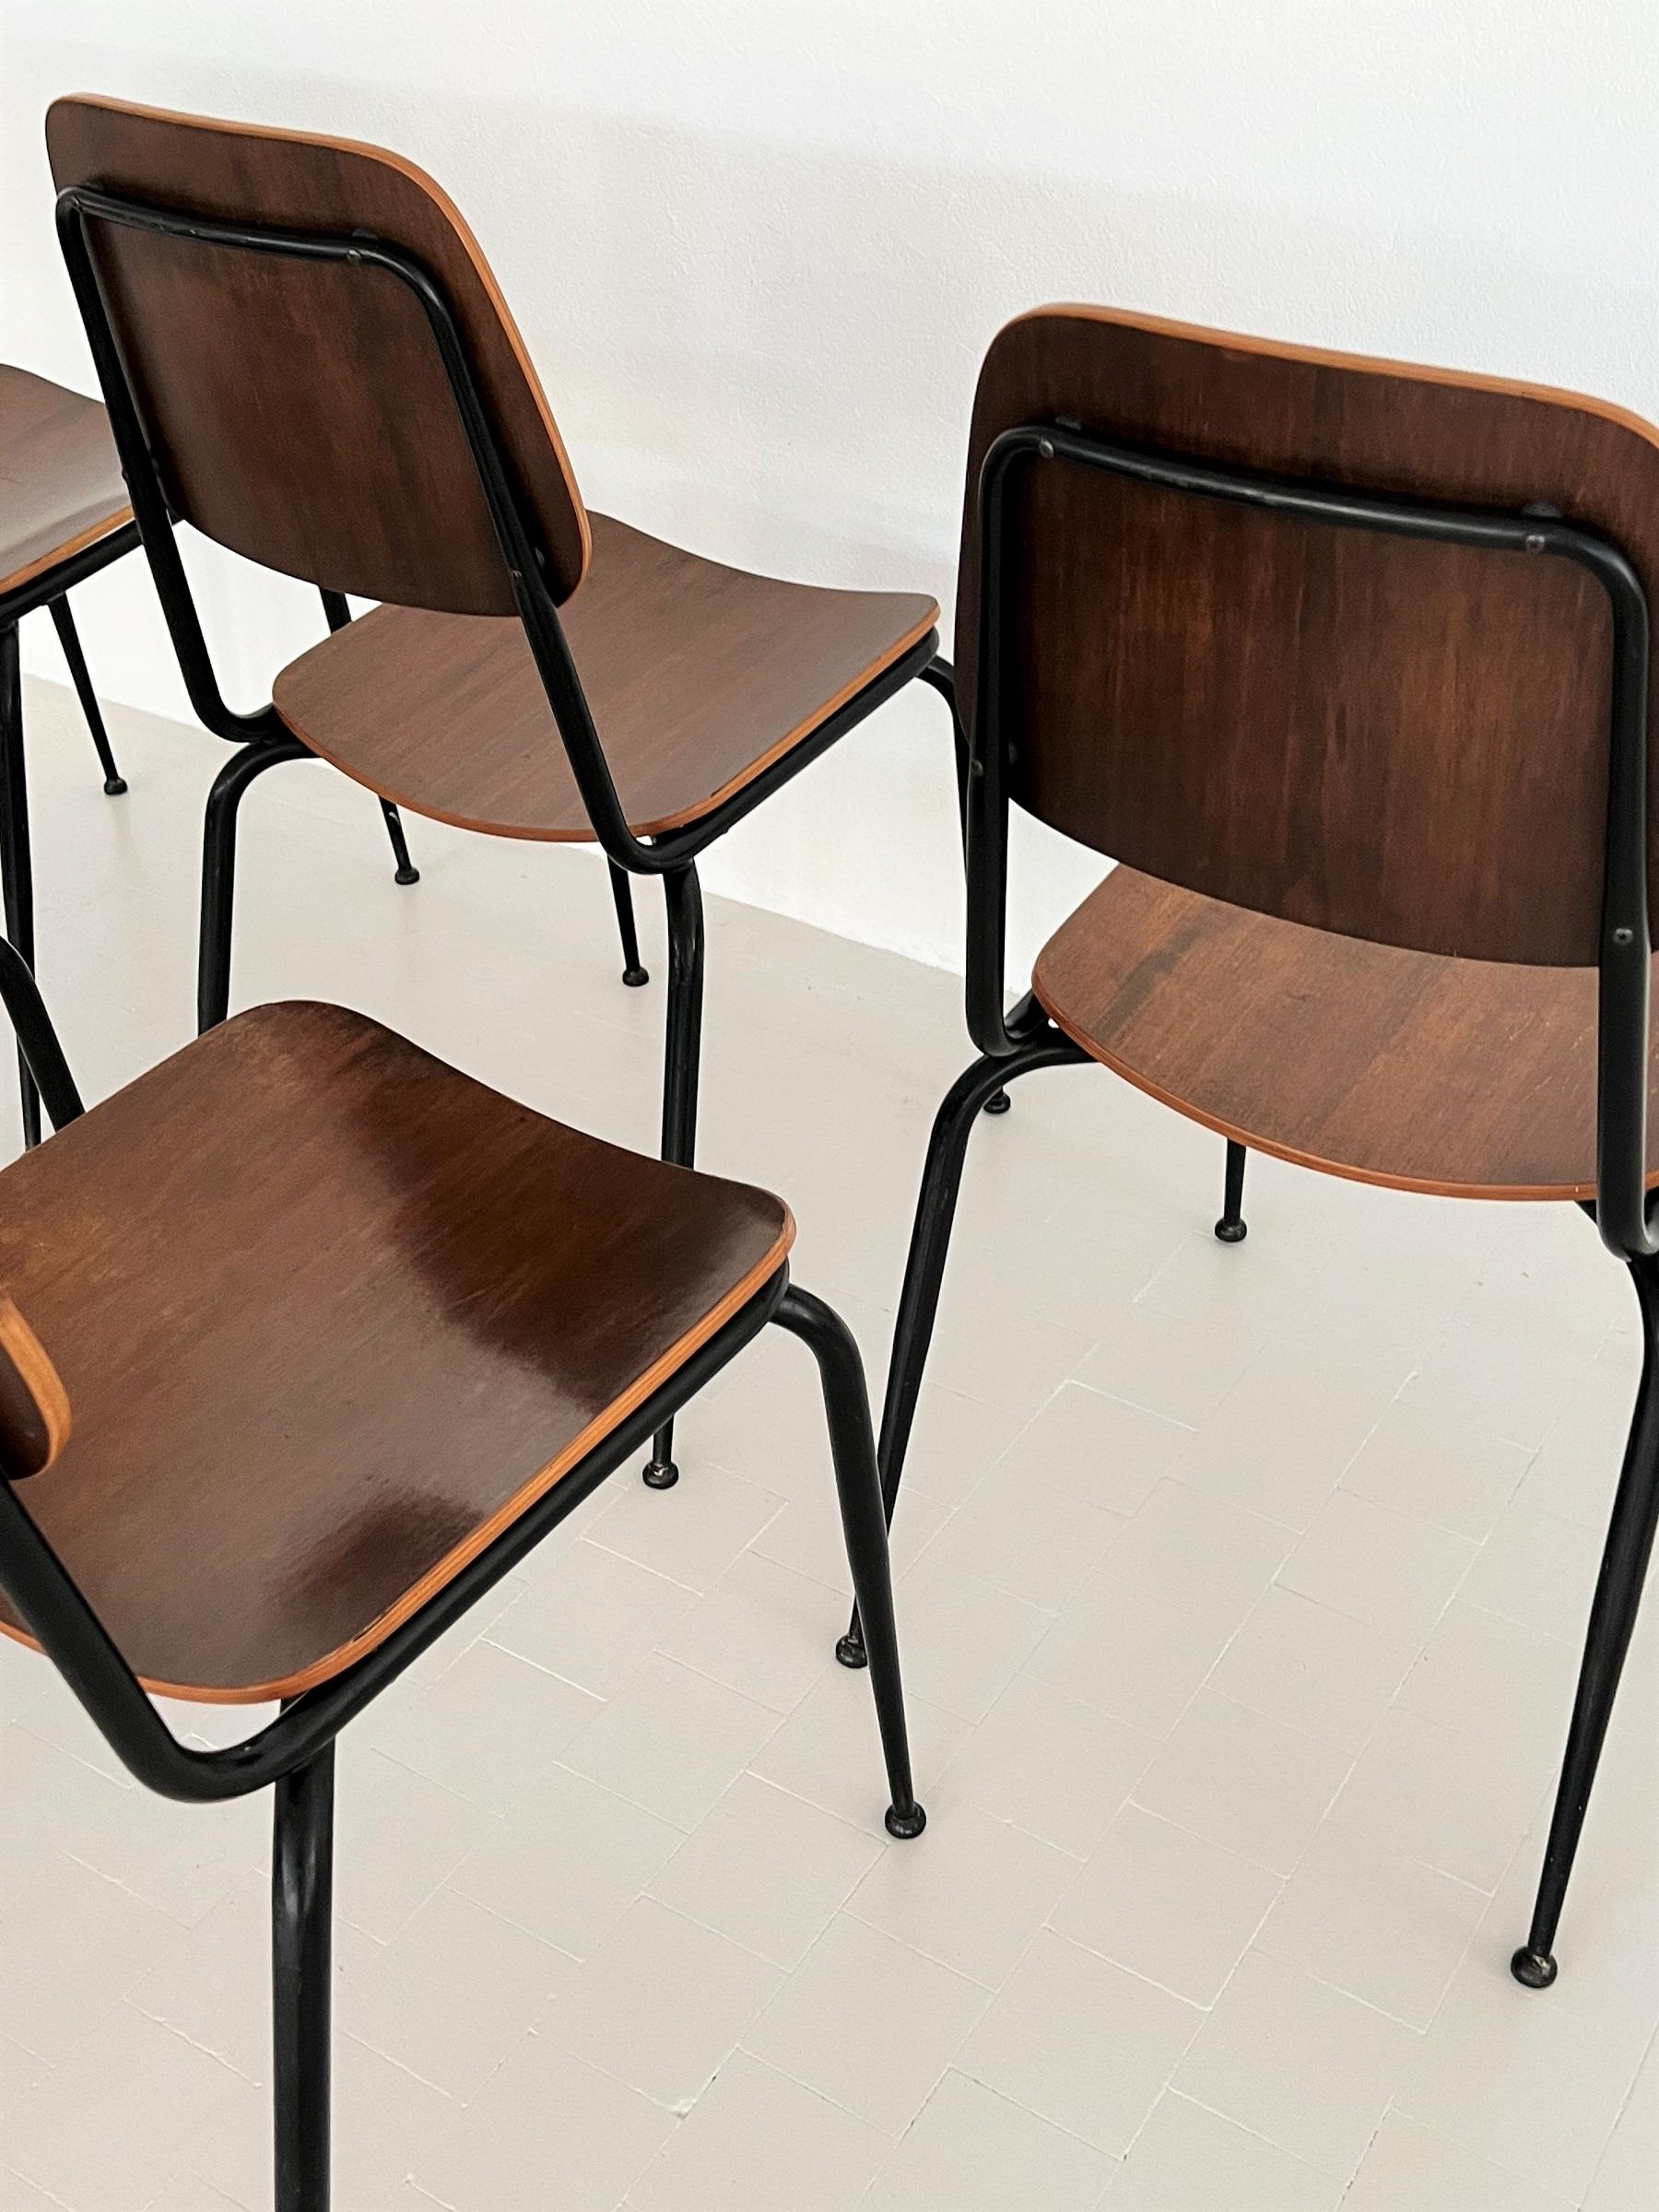 Italian Mid-Century Plywood Nutwood Chairs by Velca Legnano, 1960s For Sale 8